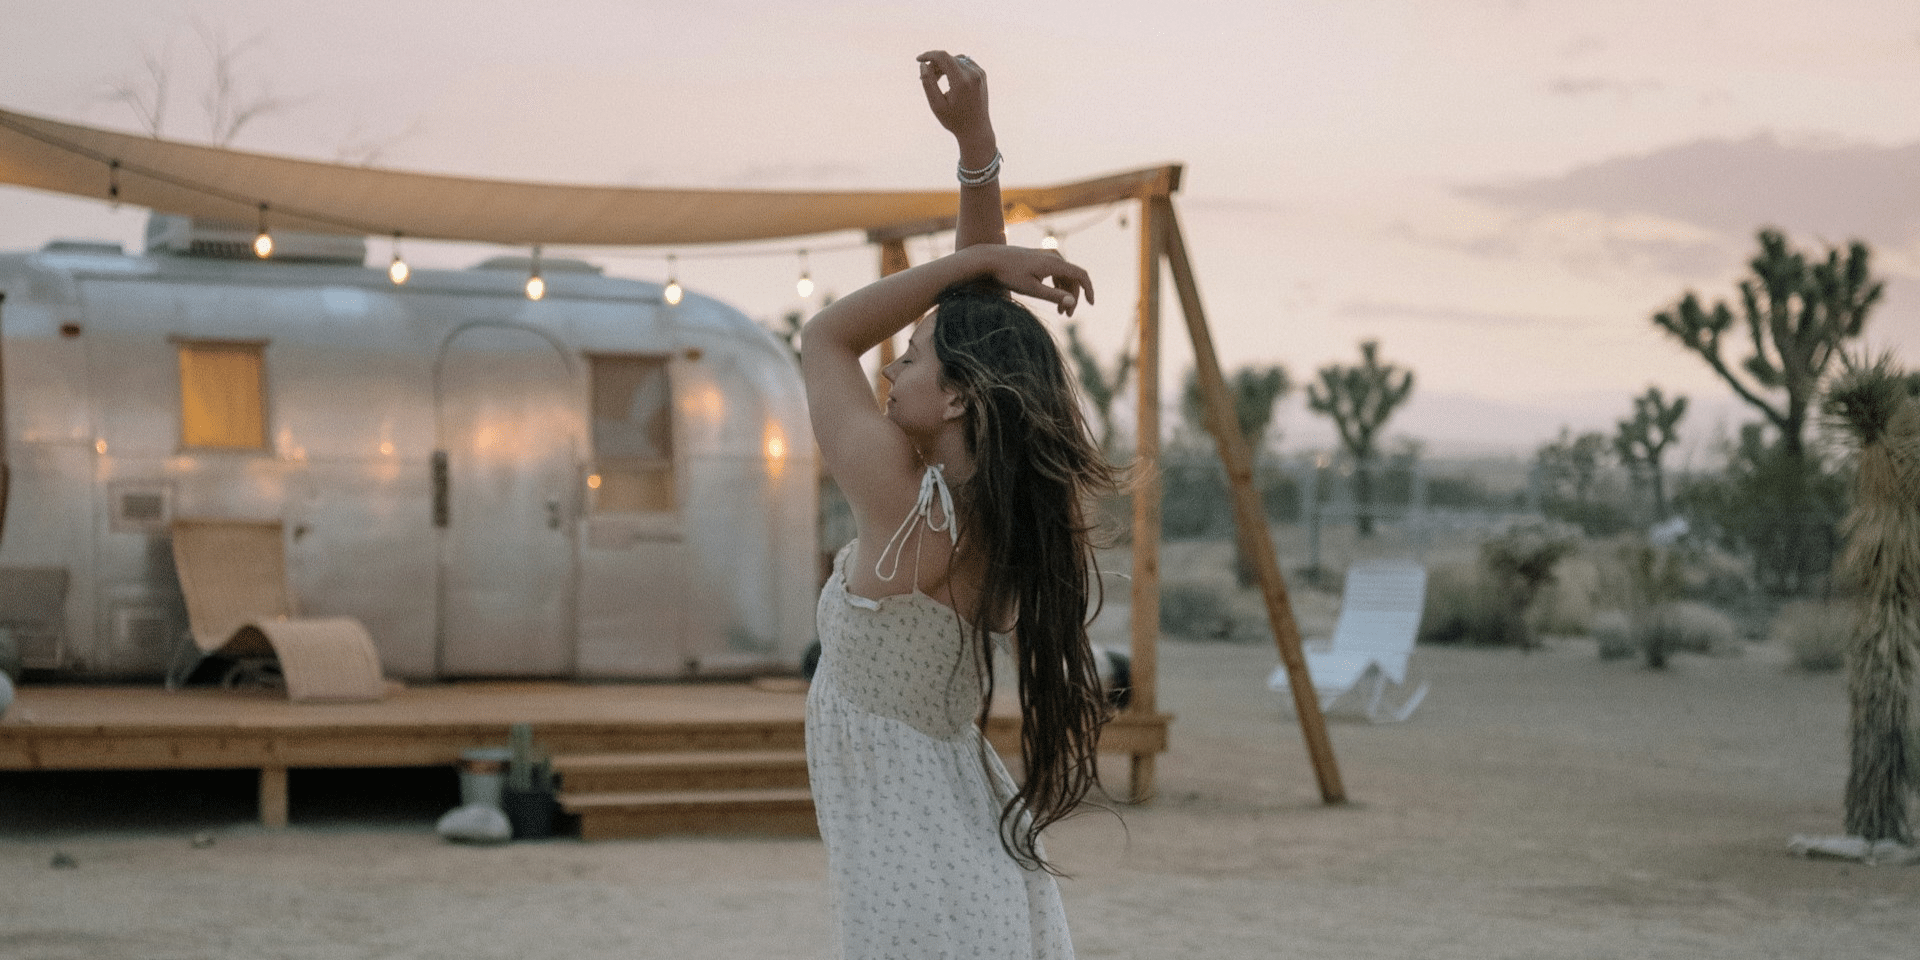 Can You Ditch the 9-to-5 for a Bohemian Life